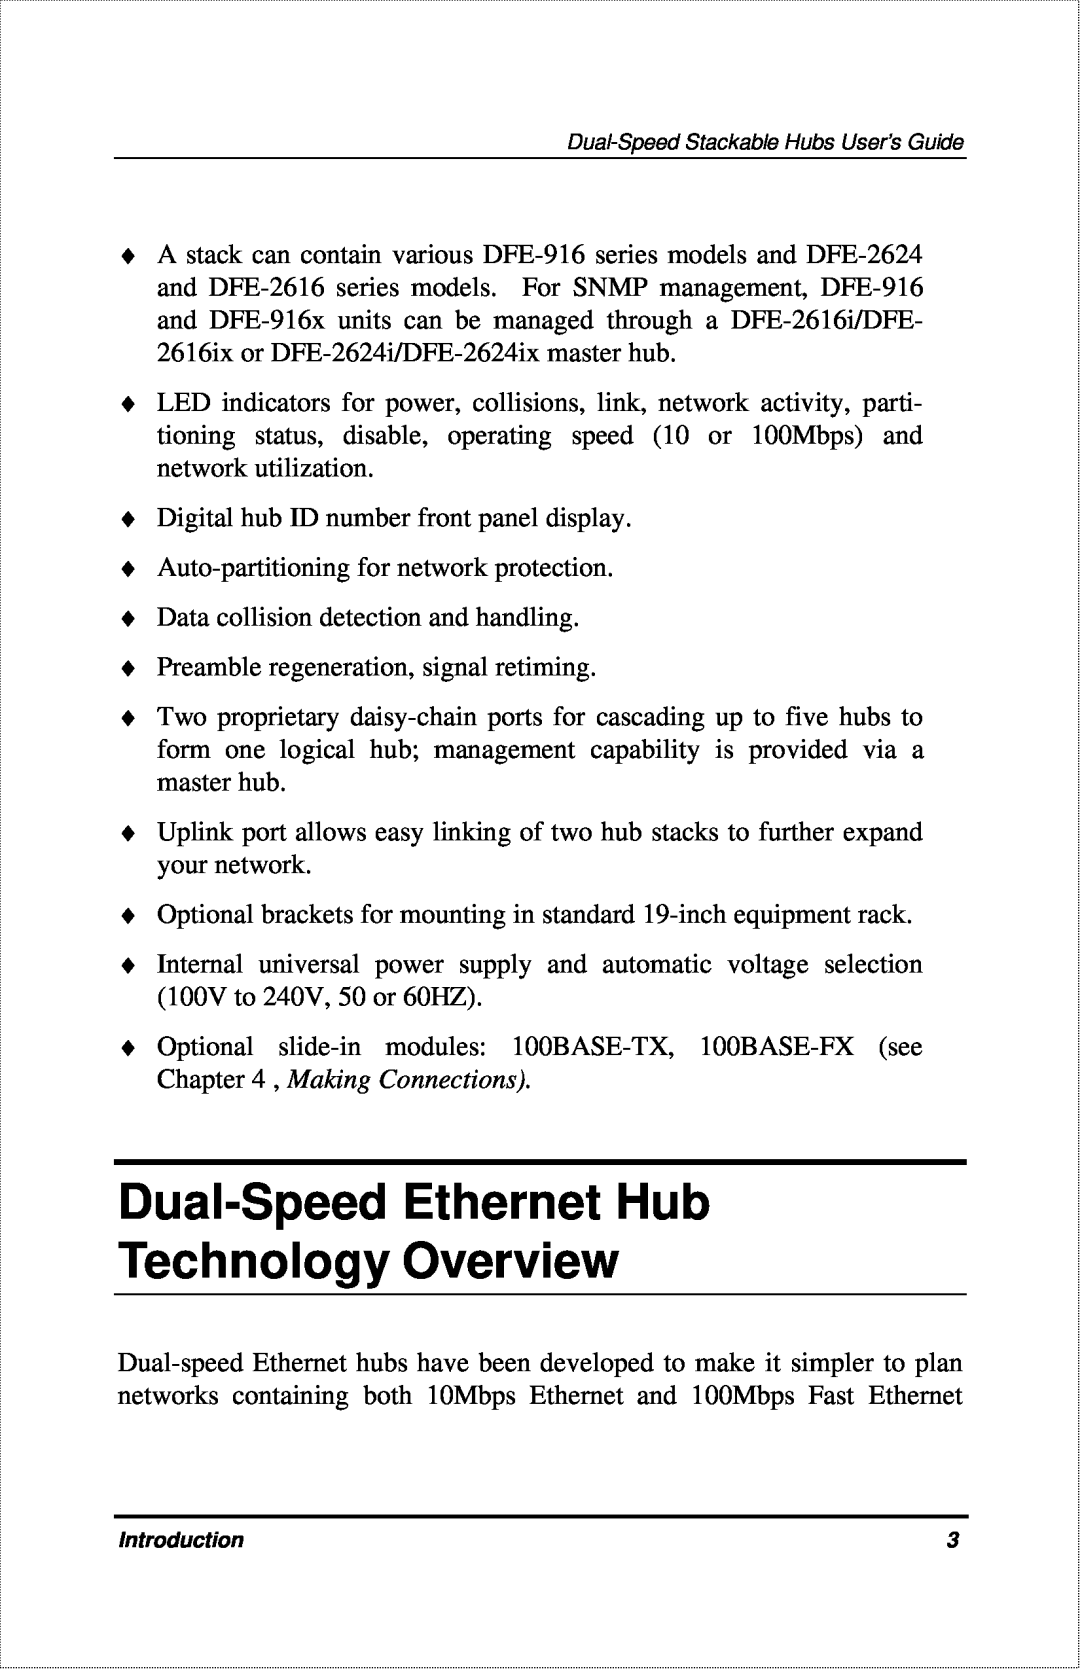 D-Link DFE-916X manual Dual-Speed Ethernet Hub Technology Overview 